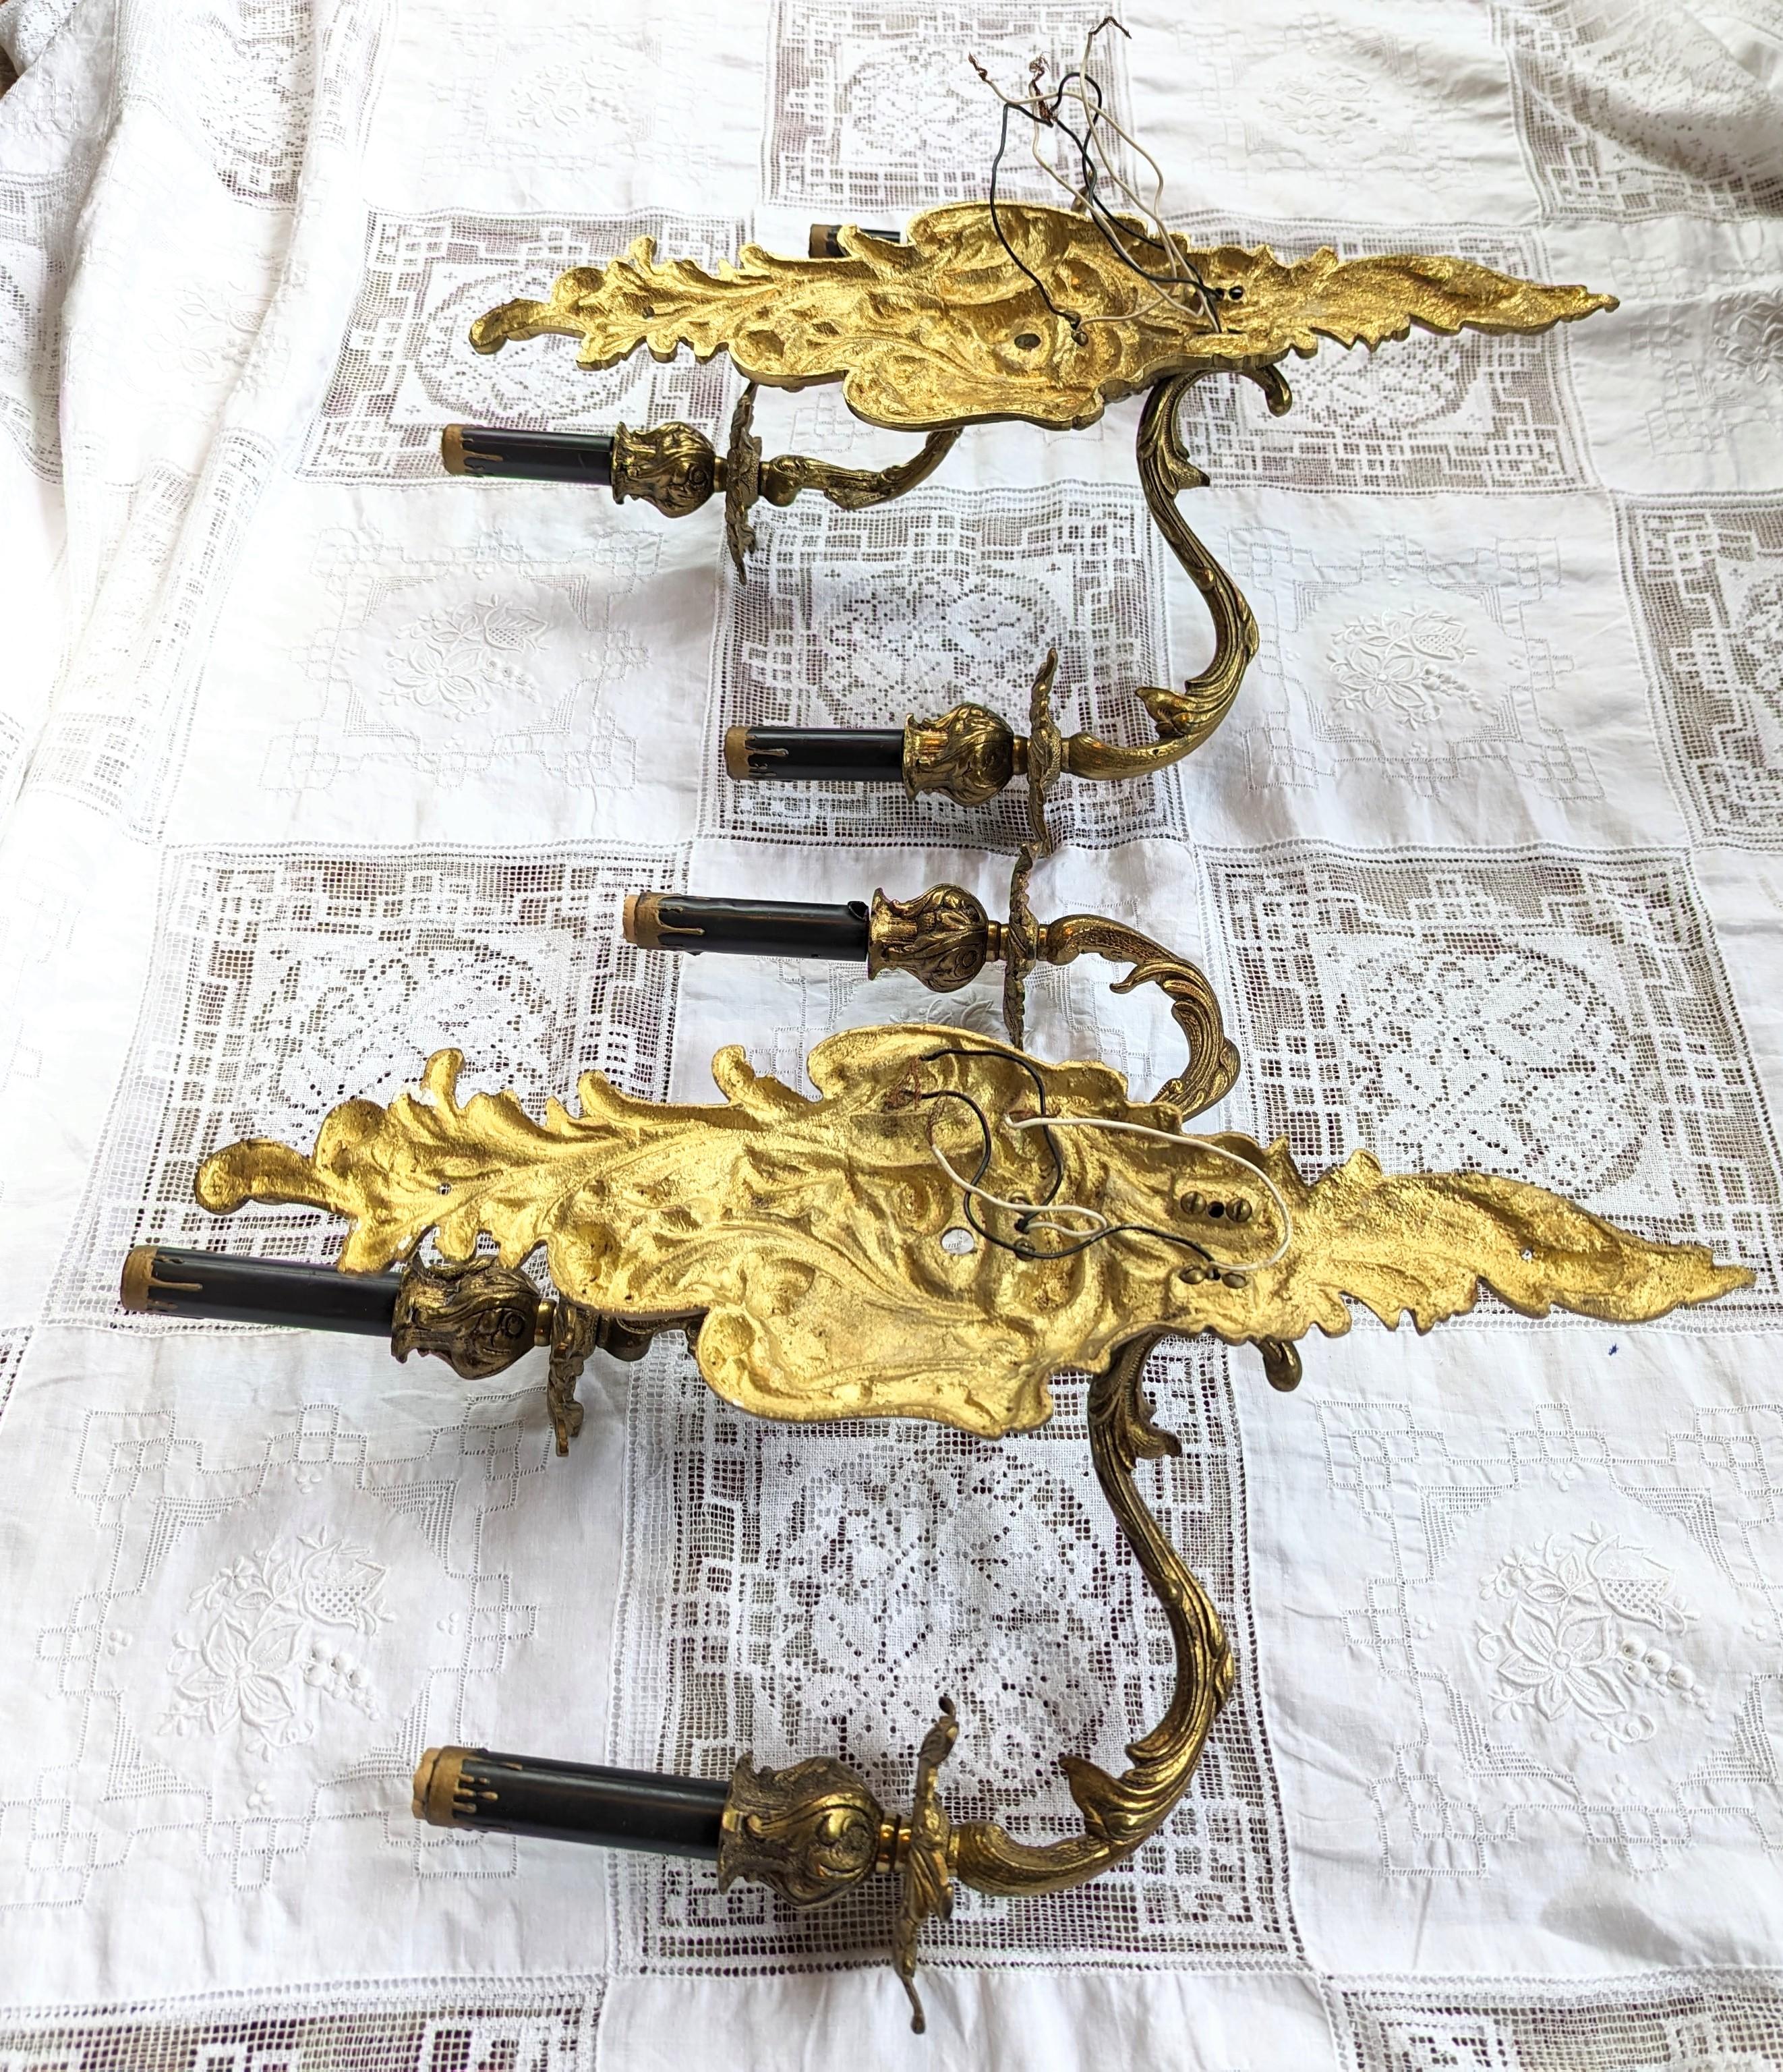 Pair of Antique French Gilded Sconces - 3 Light Armed Sconce European For Sale 3